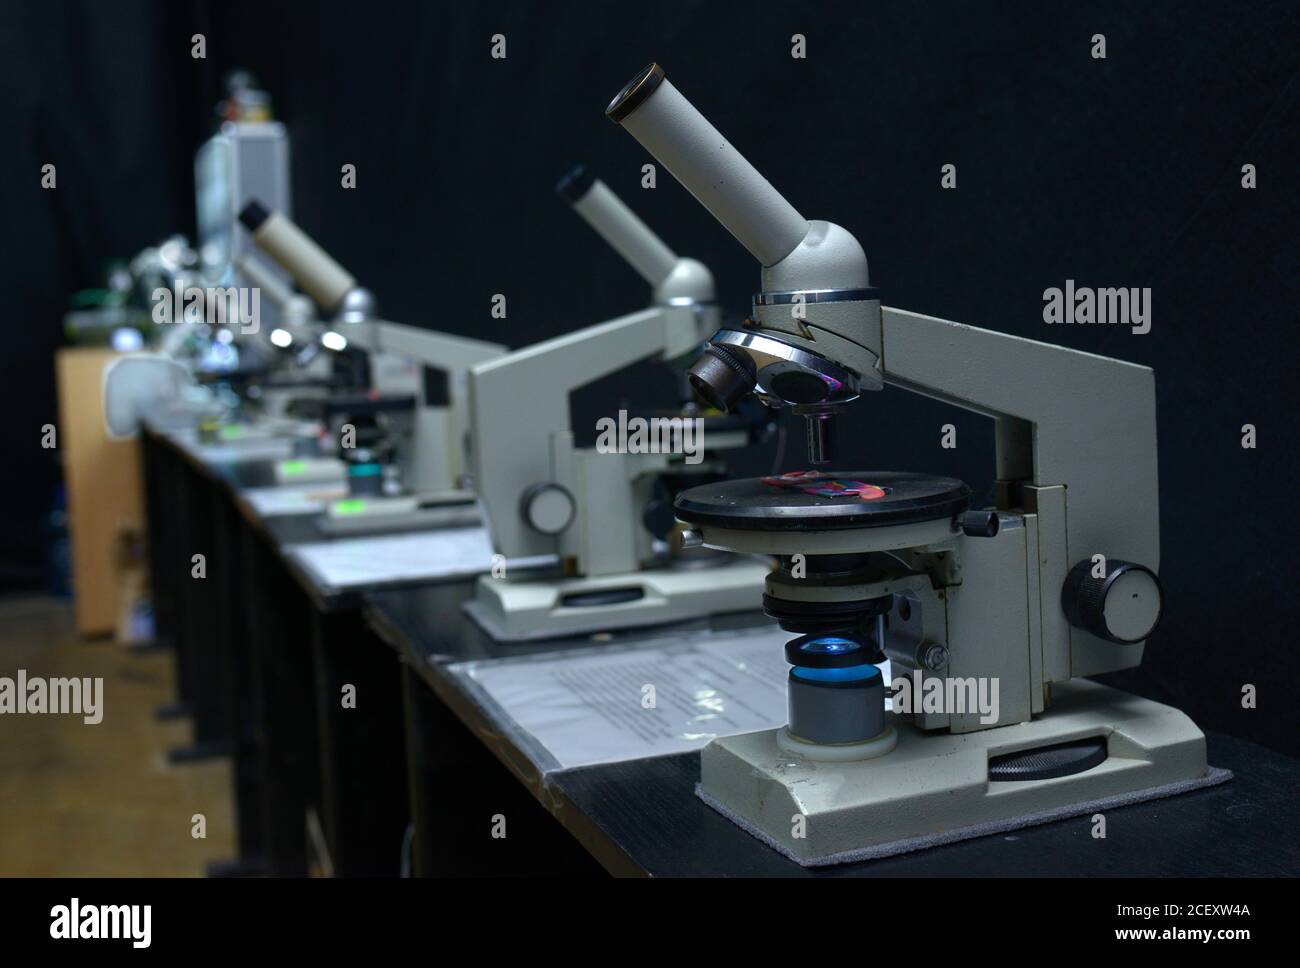 Microscopes set on the worktable of the school lab, black background Stock Photo